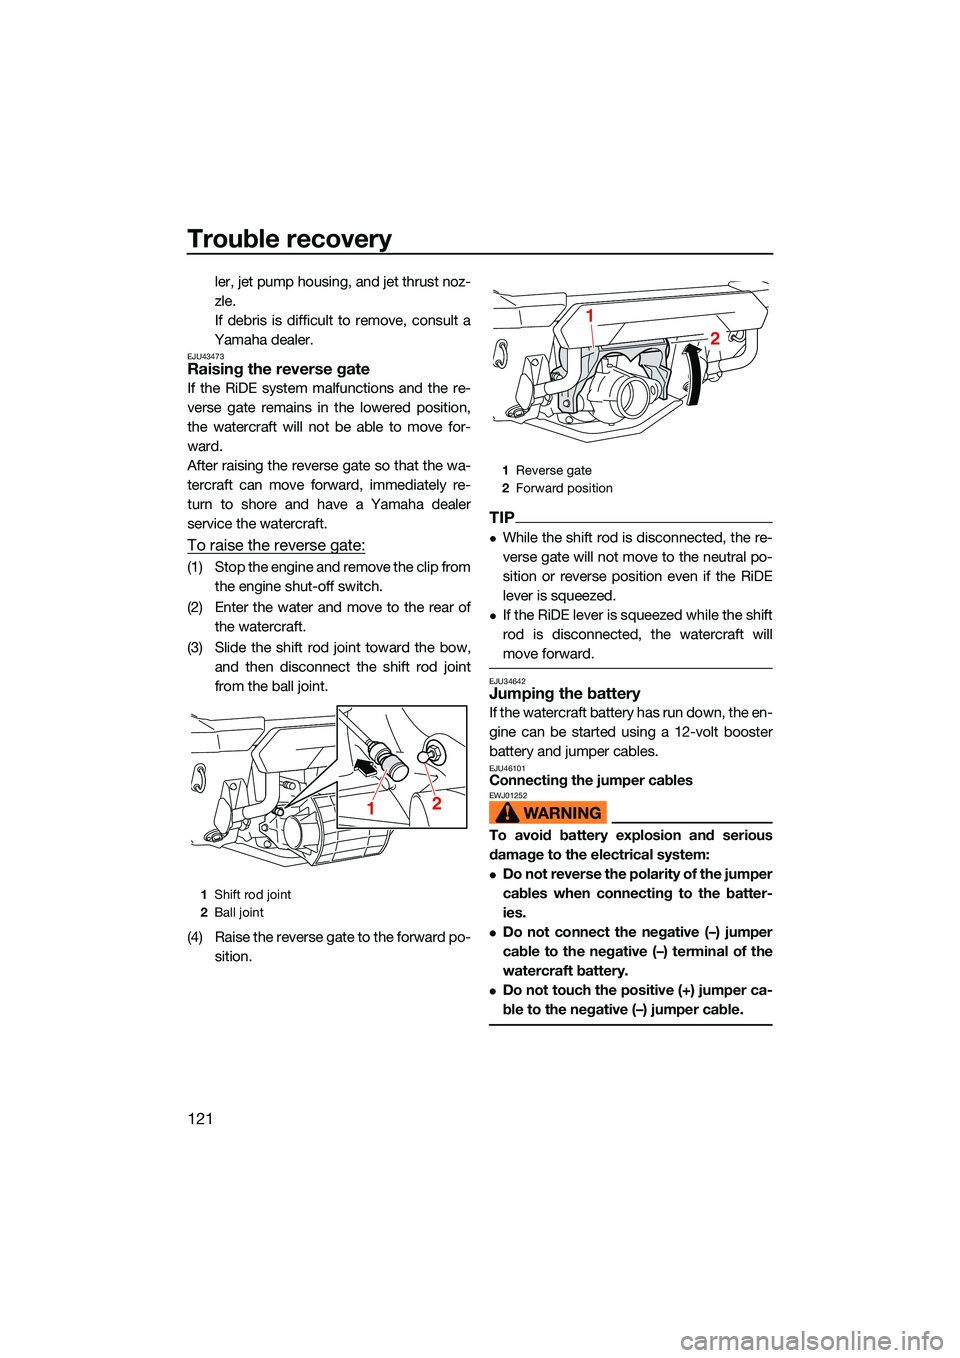 YAMAHA FX HO 2022  Owners Manual Trouble recovery
121
ler, jet pump housing, and jet thrust noz-
zle.
If debris is difficult to remove, consult a
Yamaha dealer.
EJU43473Raising the reverse gate 
If the RiDE system malfunctions and th